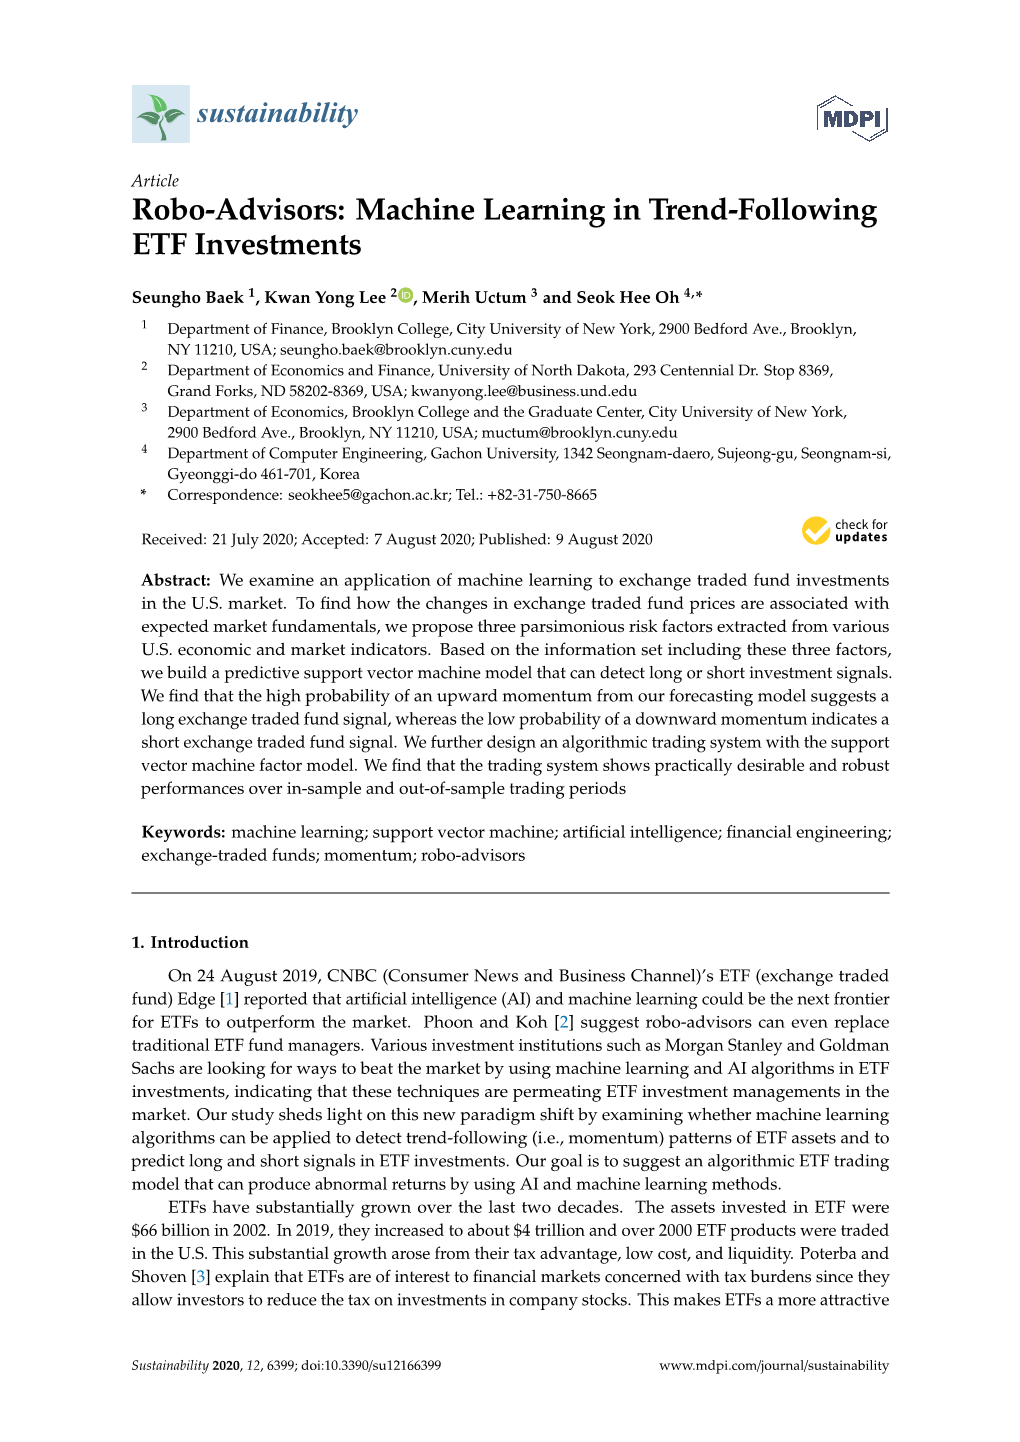 Robo-Advisors: Machine Learning in Trend-Following ETF Investments